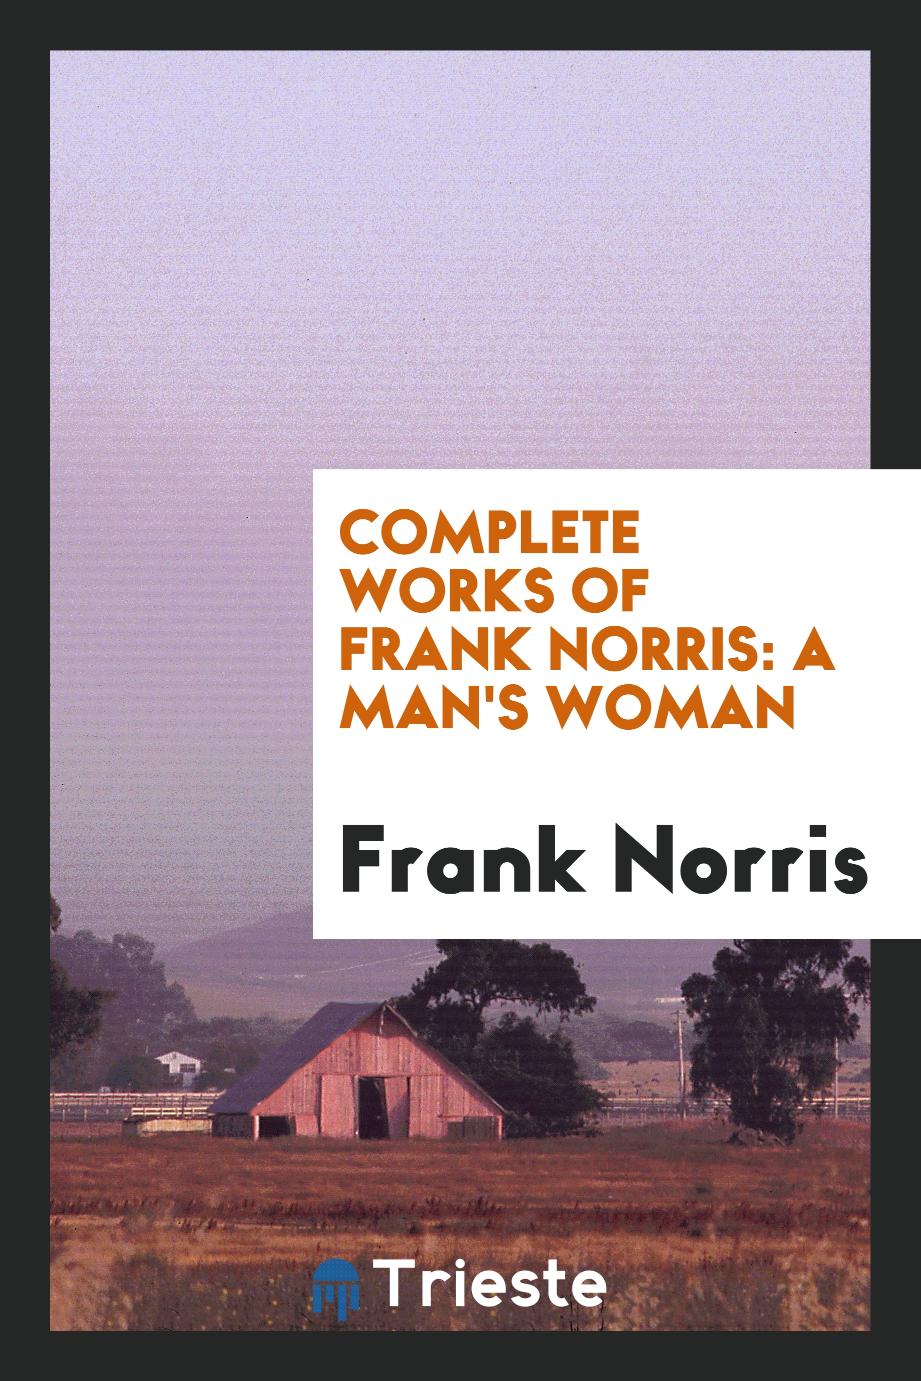 Complete Works of Frank Norris: A Man's Woman